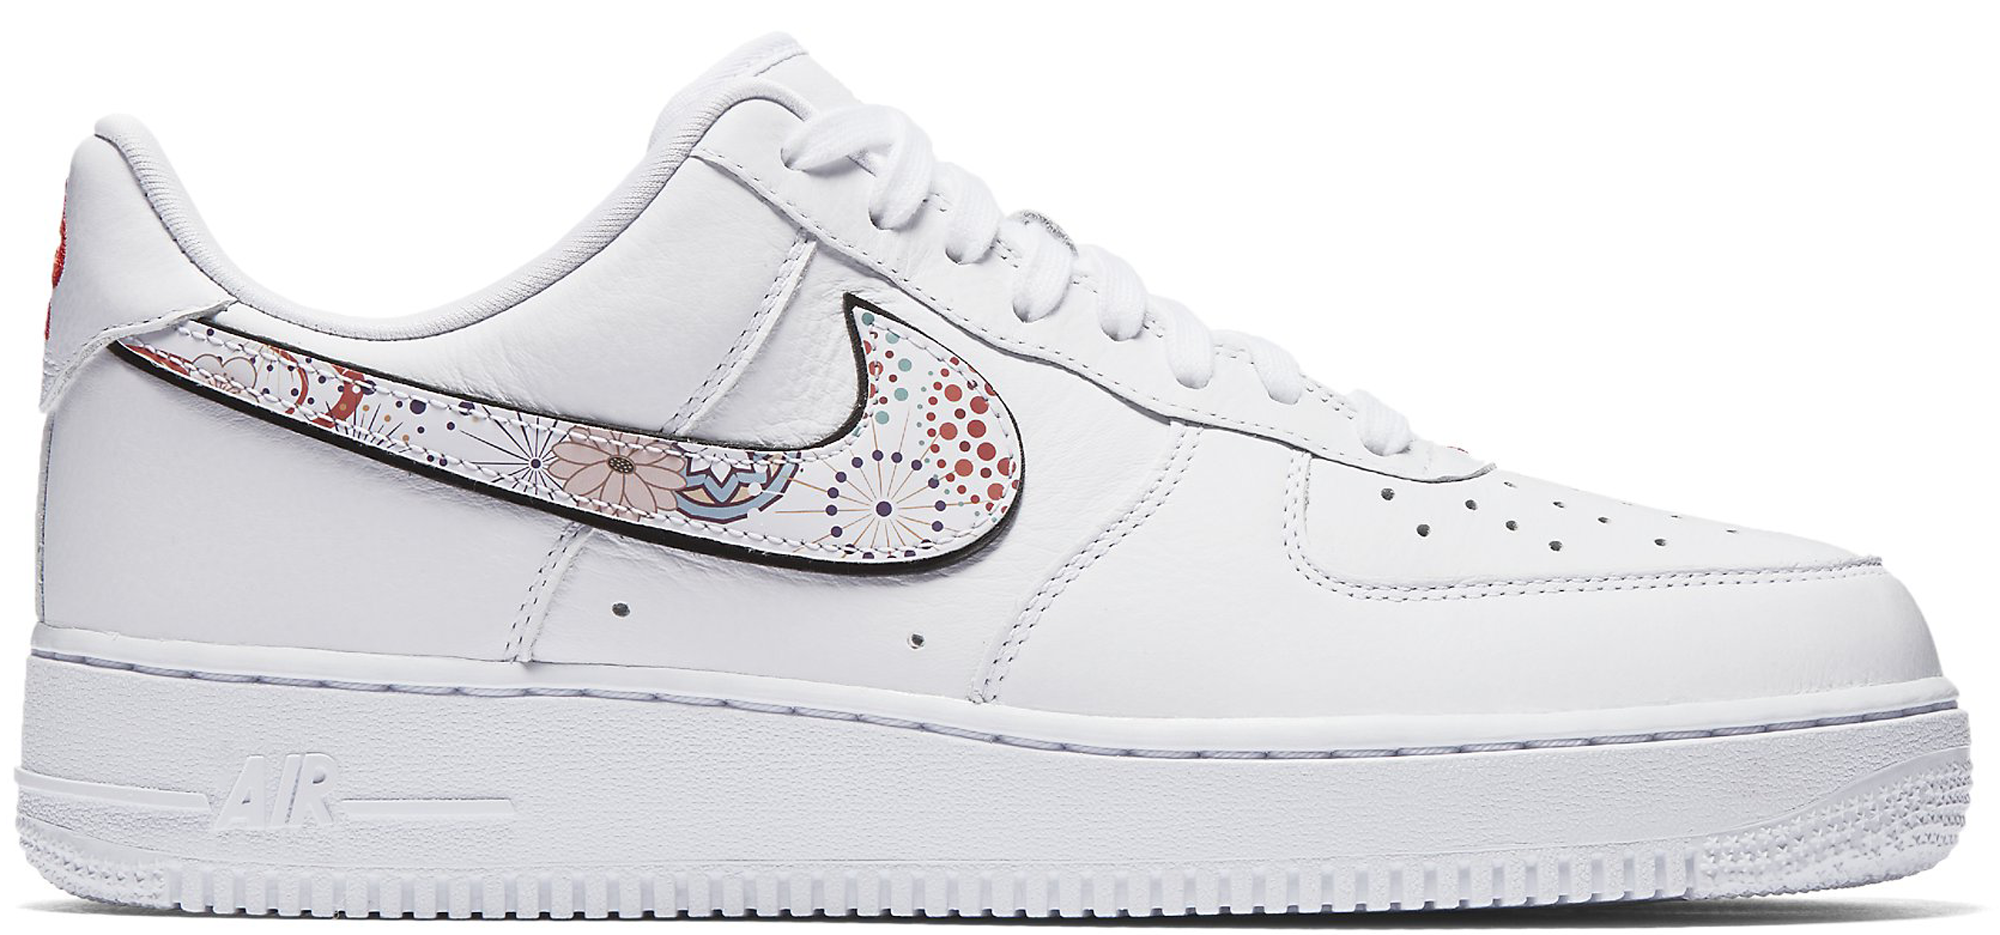 Nike Air Force 1 Low Lunar New Year 2018 - StockX News